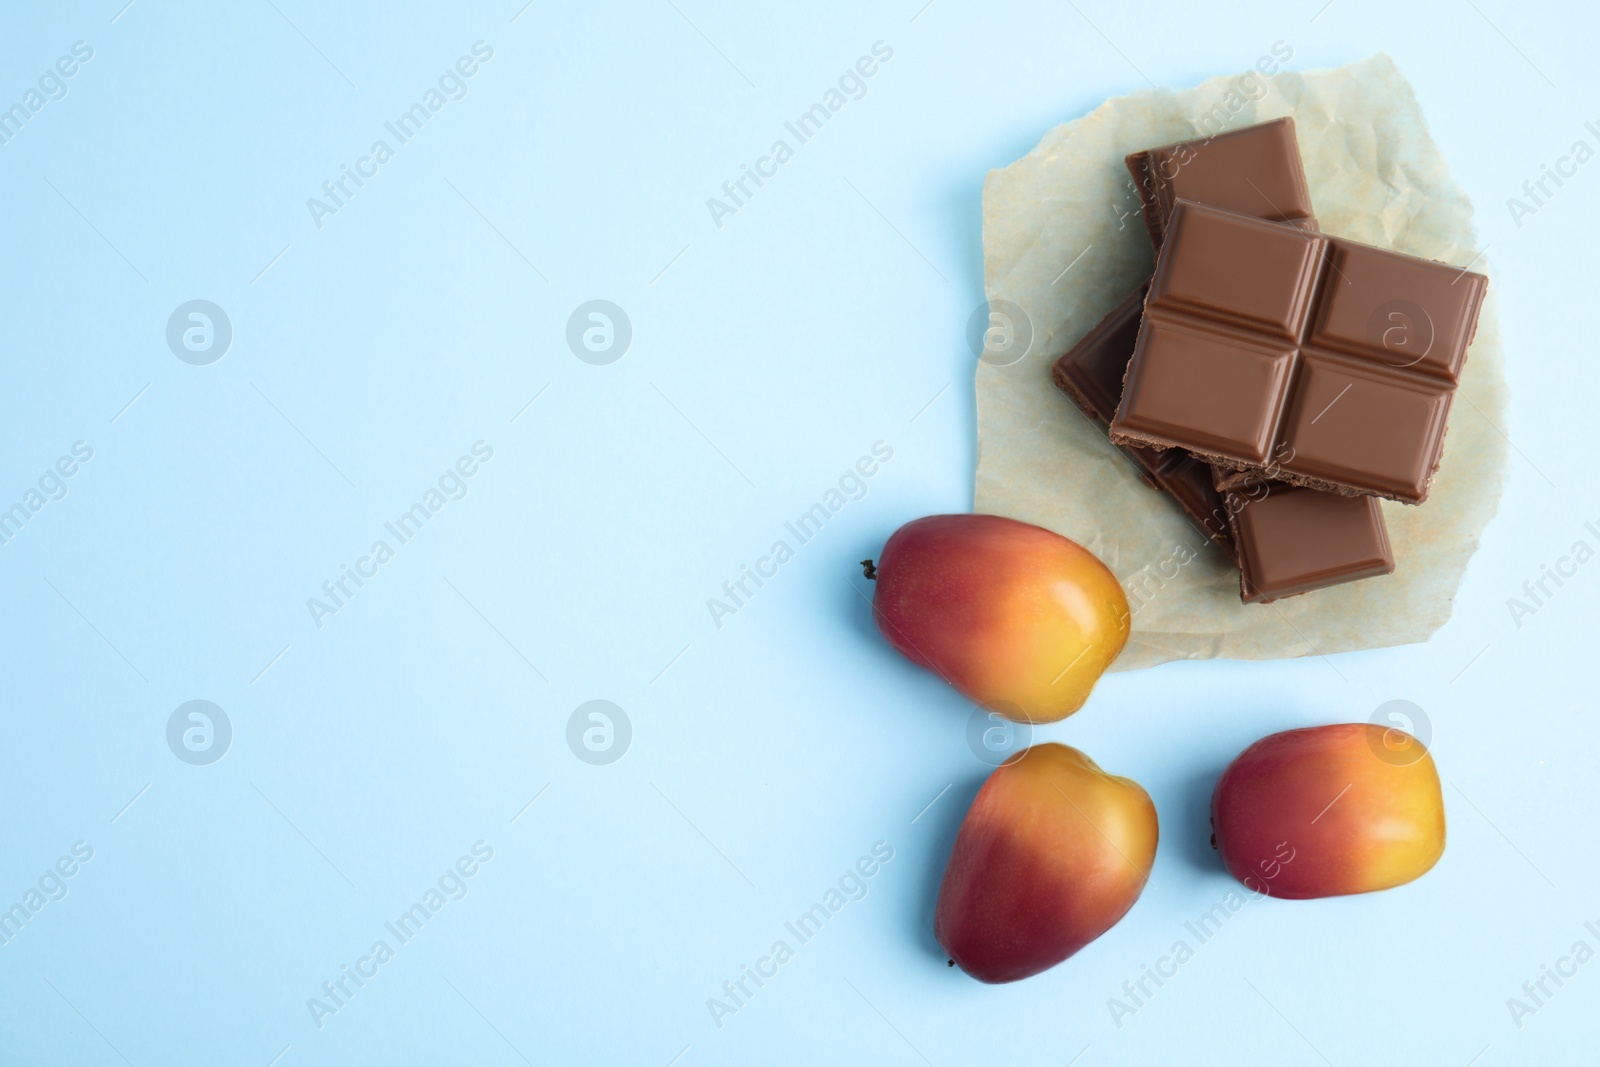 Image of Fresh ripe palm oil fruits and chocolates on light blue background, flat lay. Space for text